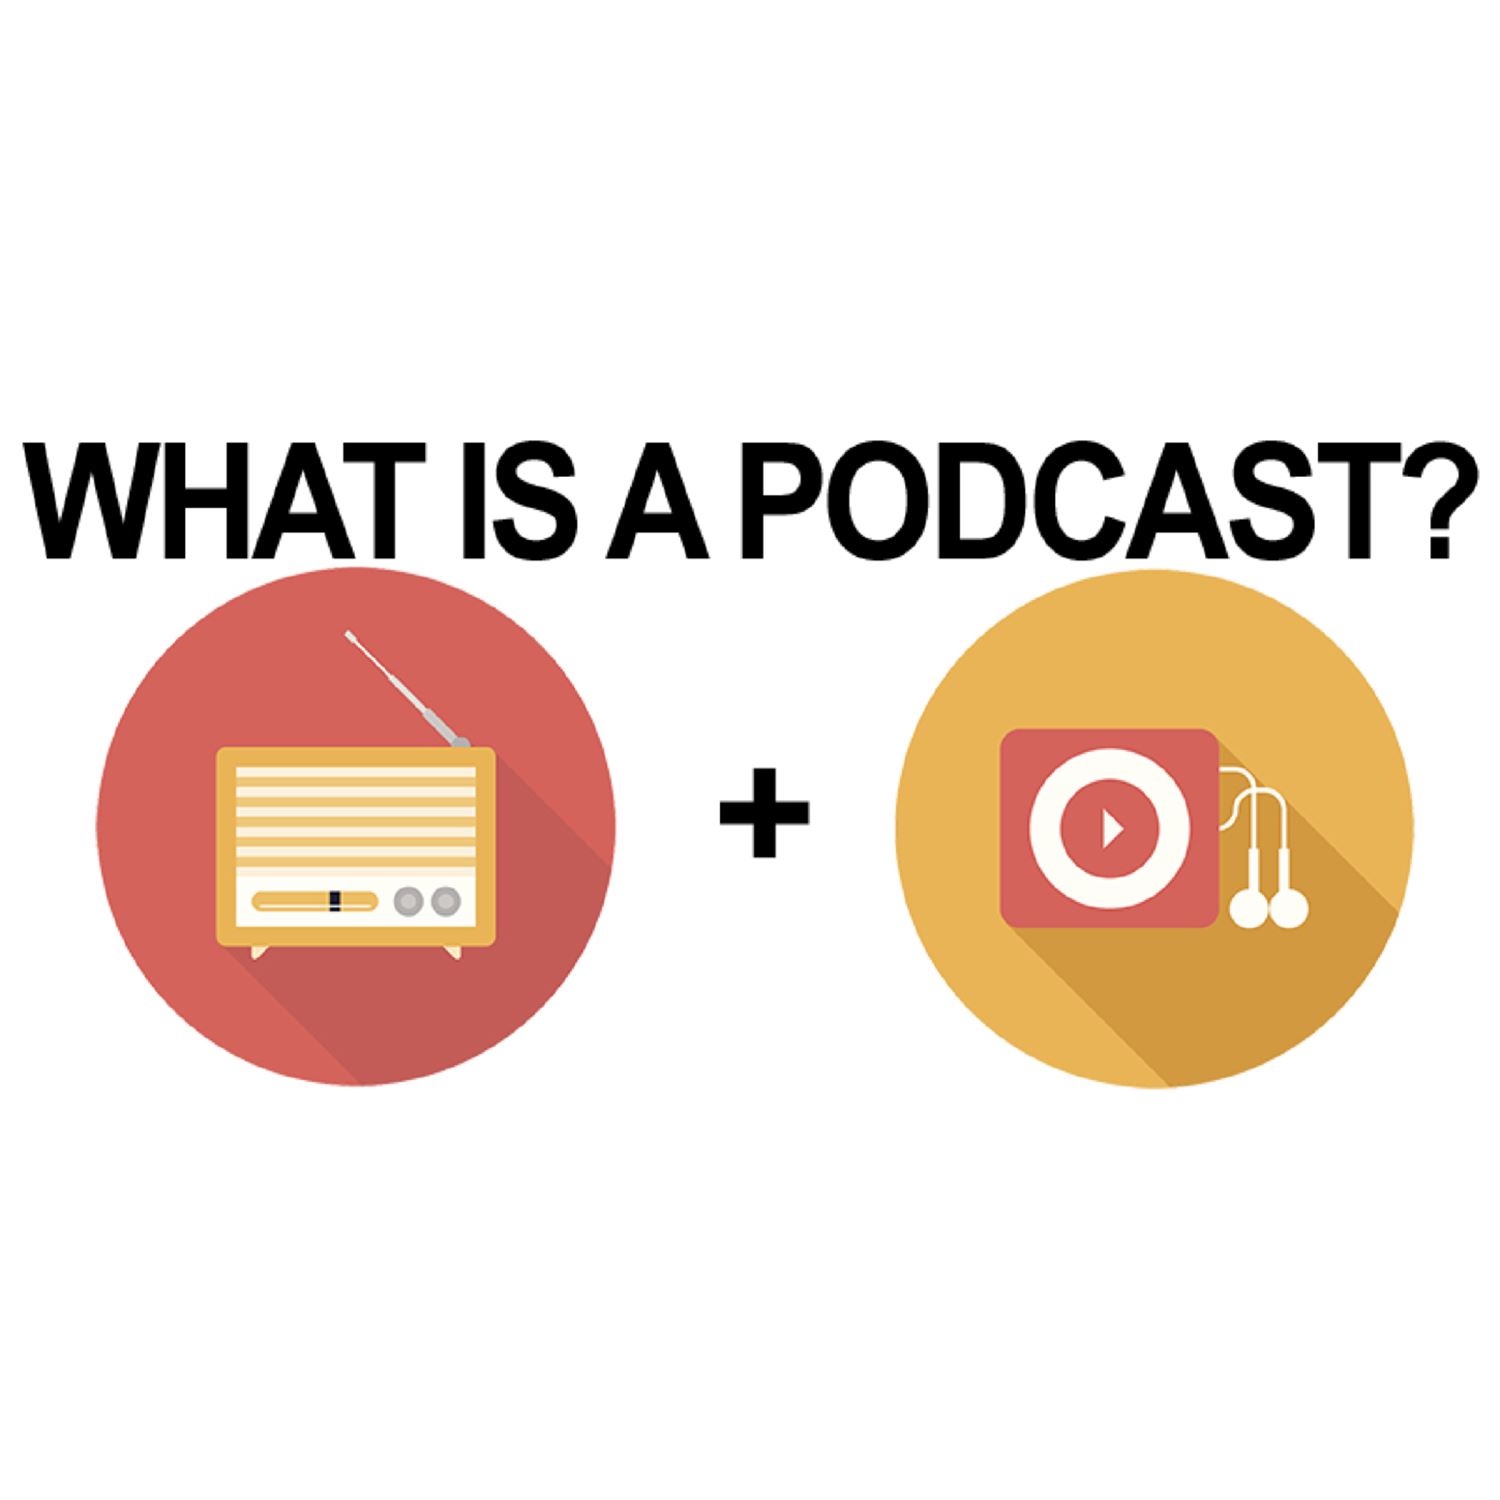 What is a podcast and its value?